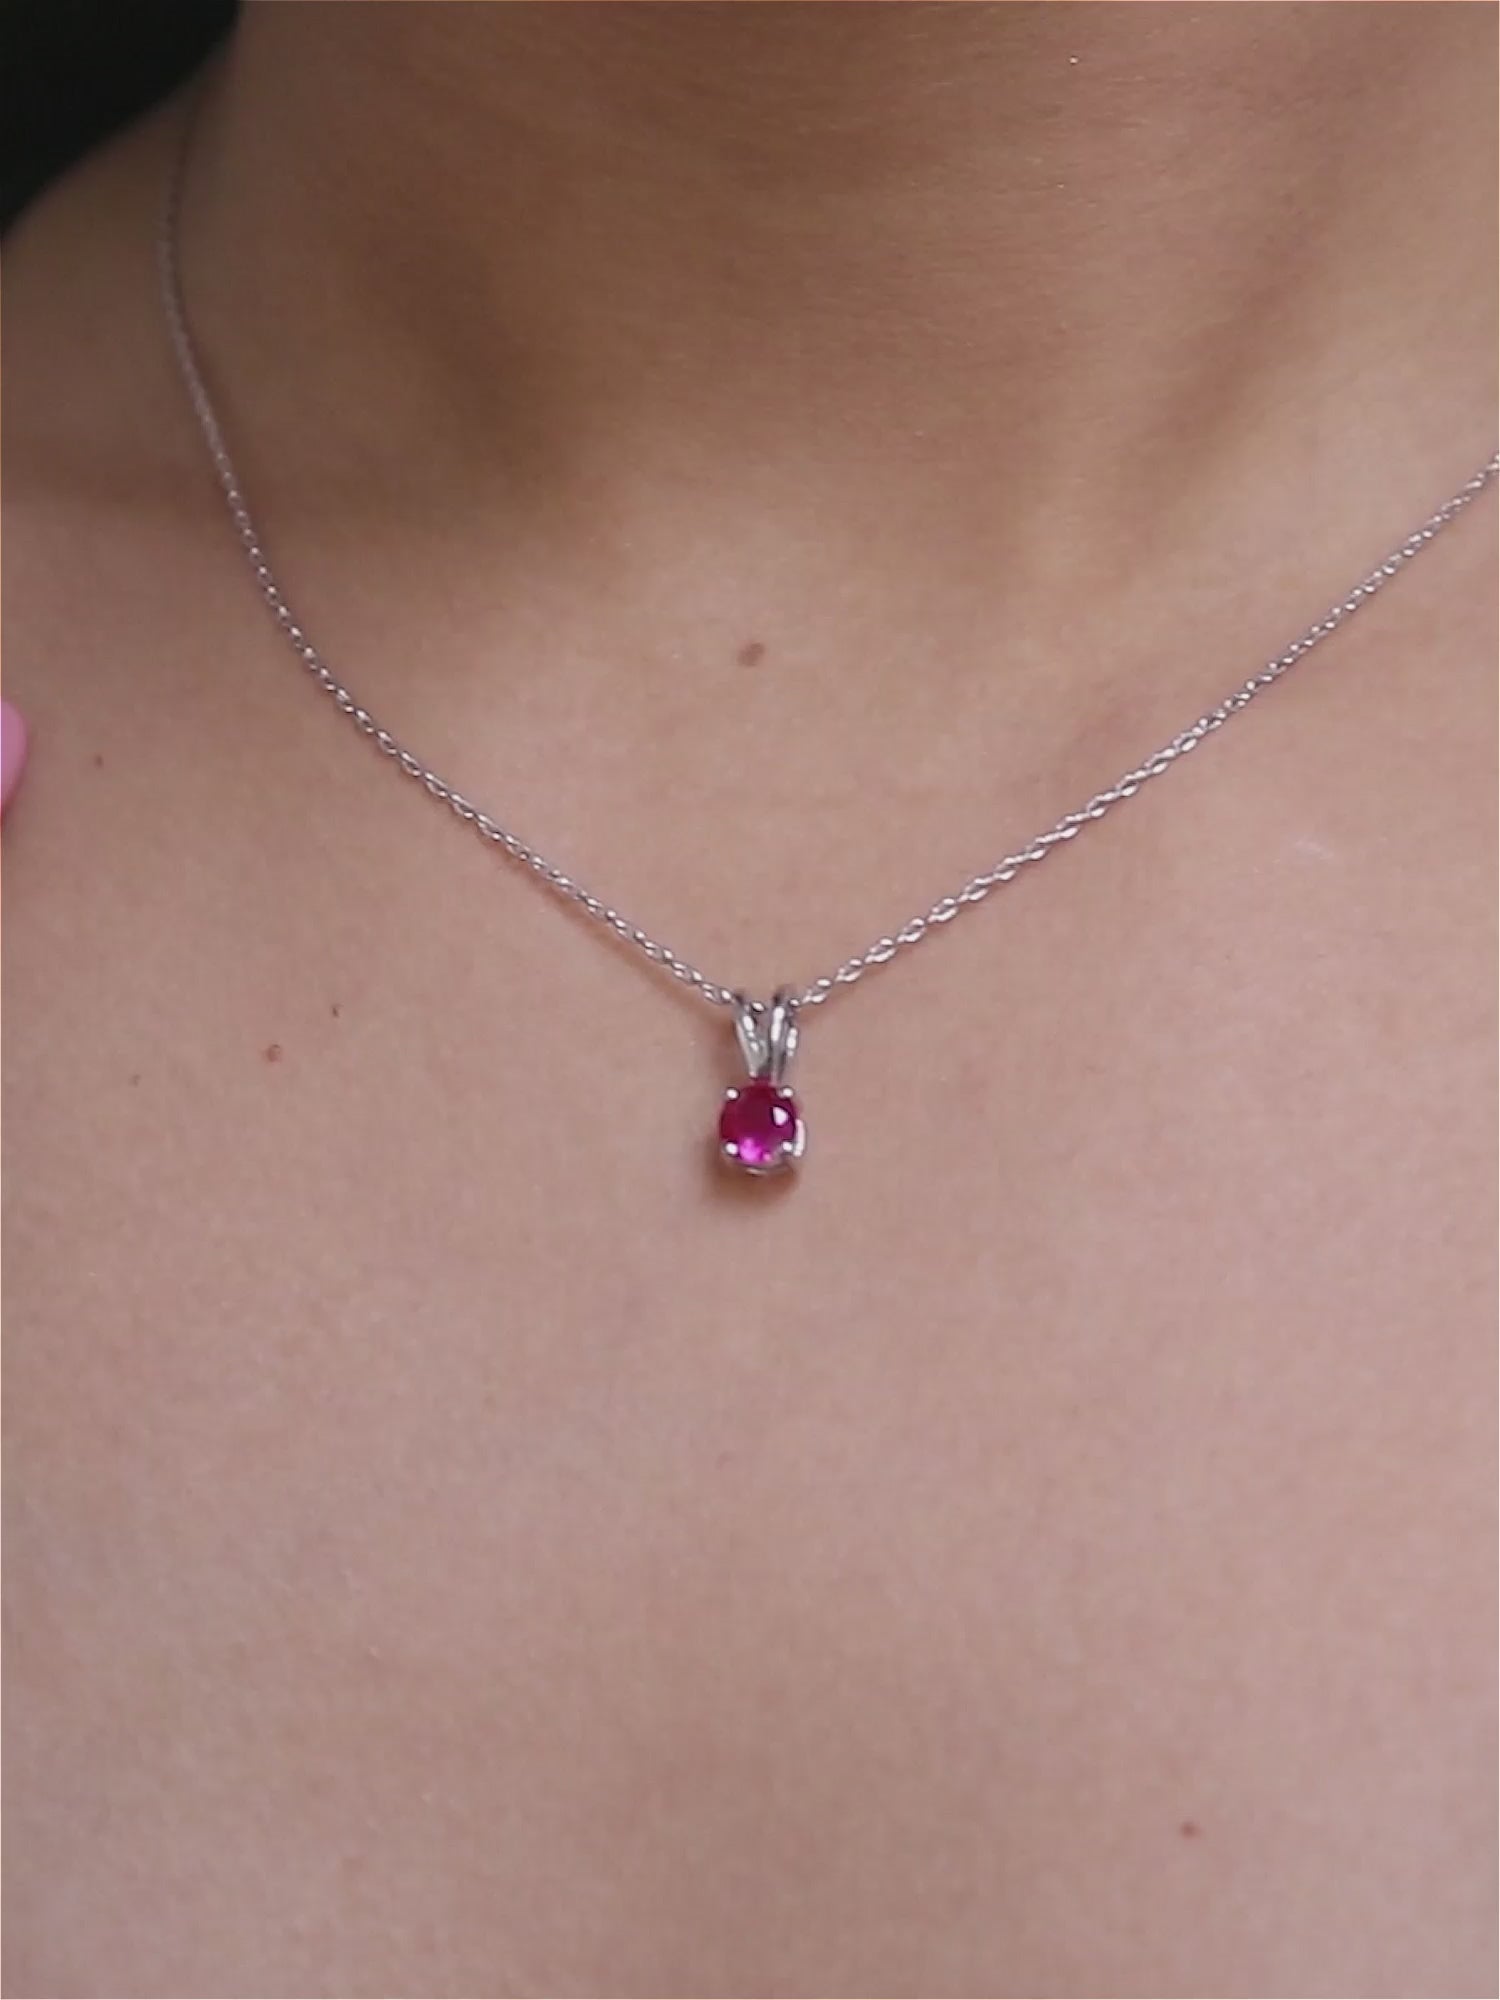 ORNATE 0.50 CARAT RUBY PENDANT NECKLACE IN SILVER FOR WOMEN0.5 Carat Ruby Daily Wear Solitaire Pendant With Chain-6